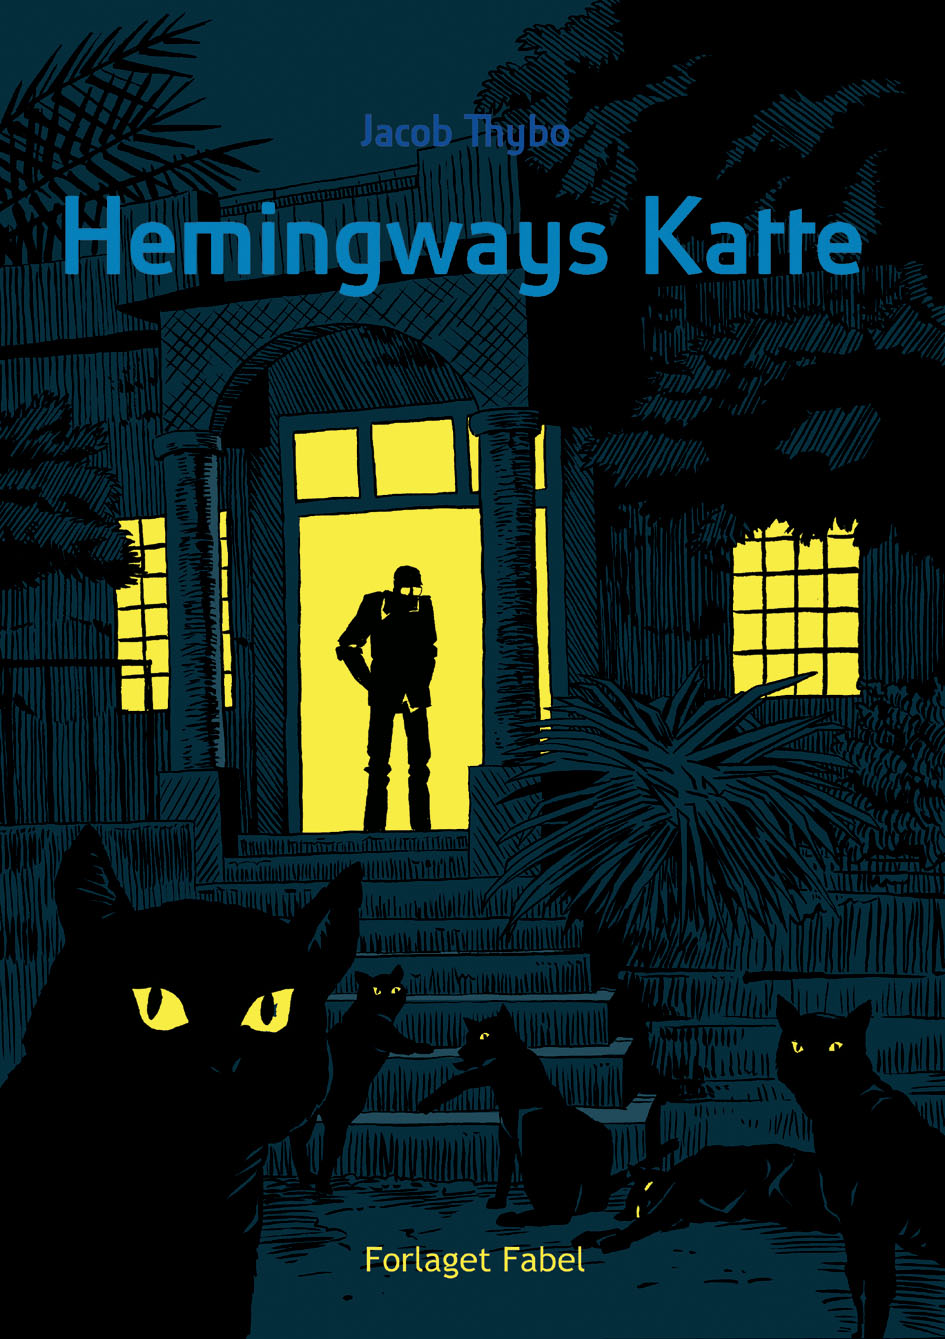 Hemmingway's Cats, Jacob Thybo's latest graphic novel, released in October 2019